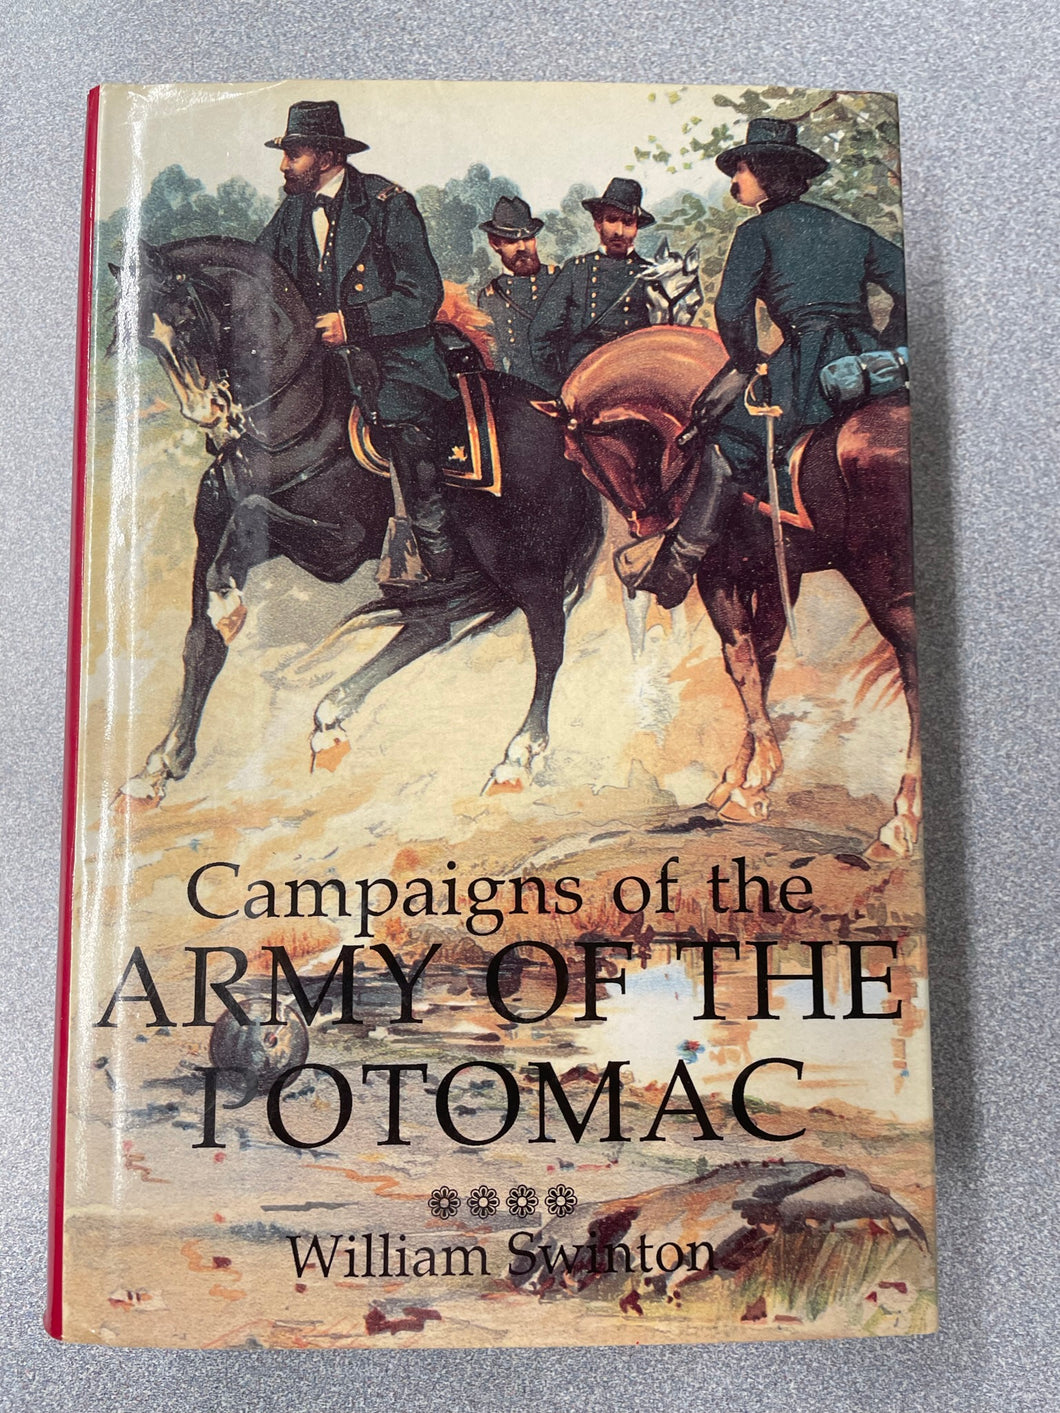 Campaigns of the Army of the Potomac, Swinton, William [1988] ML 9/23